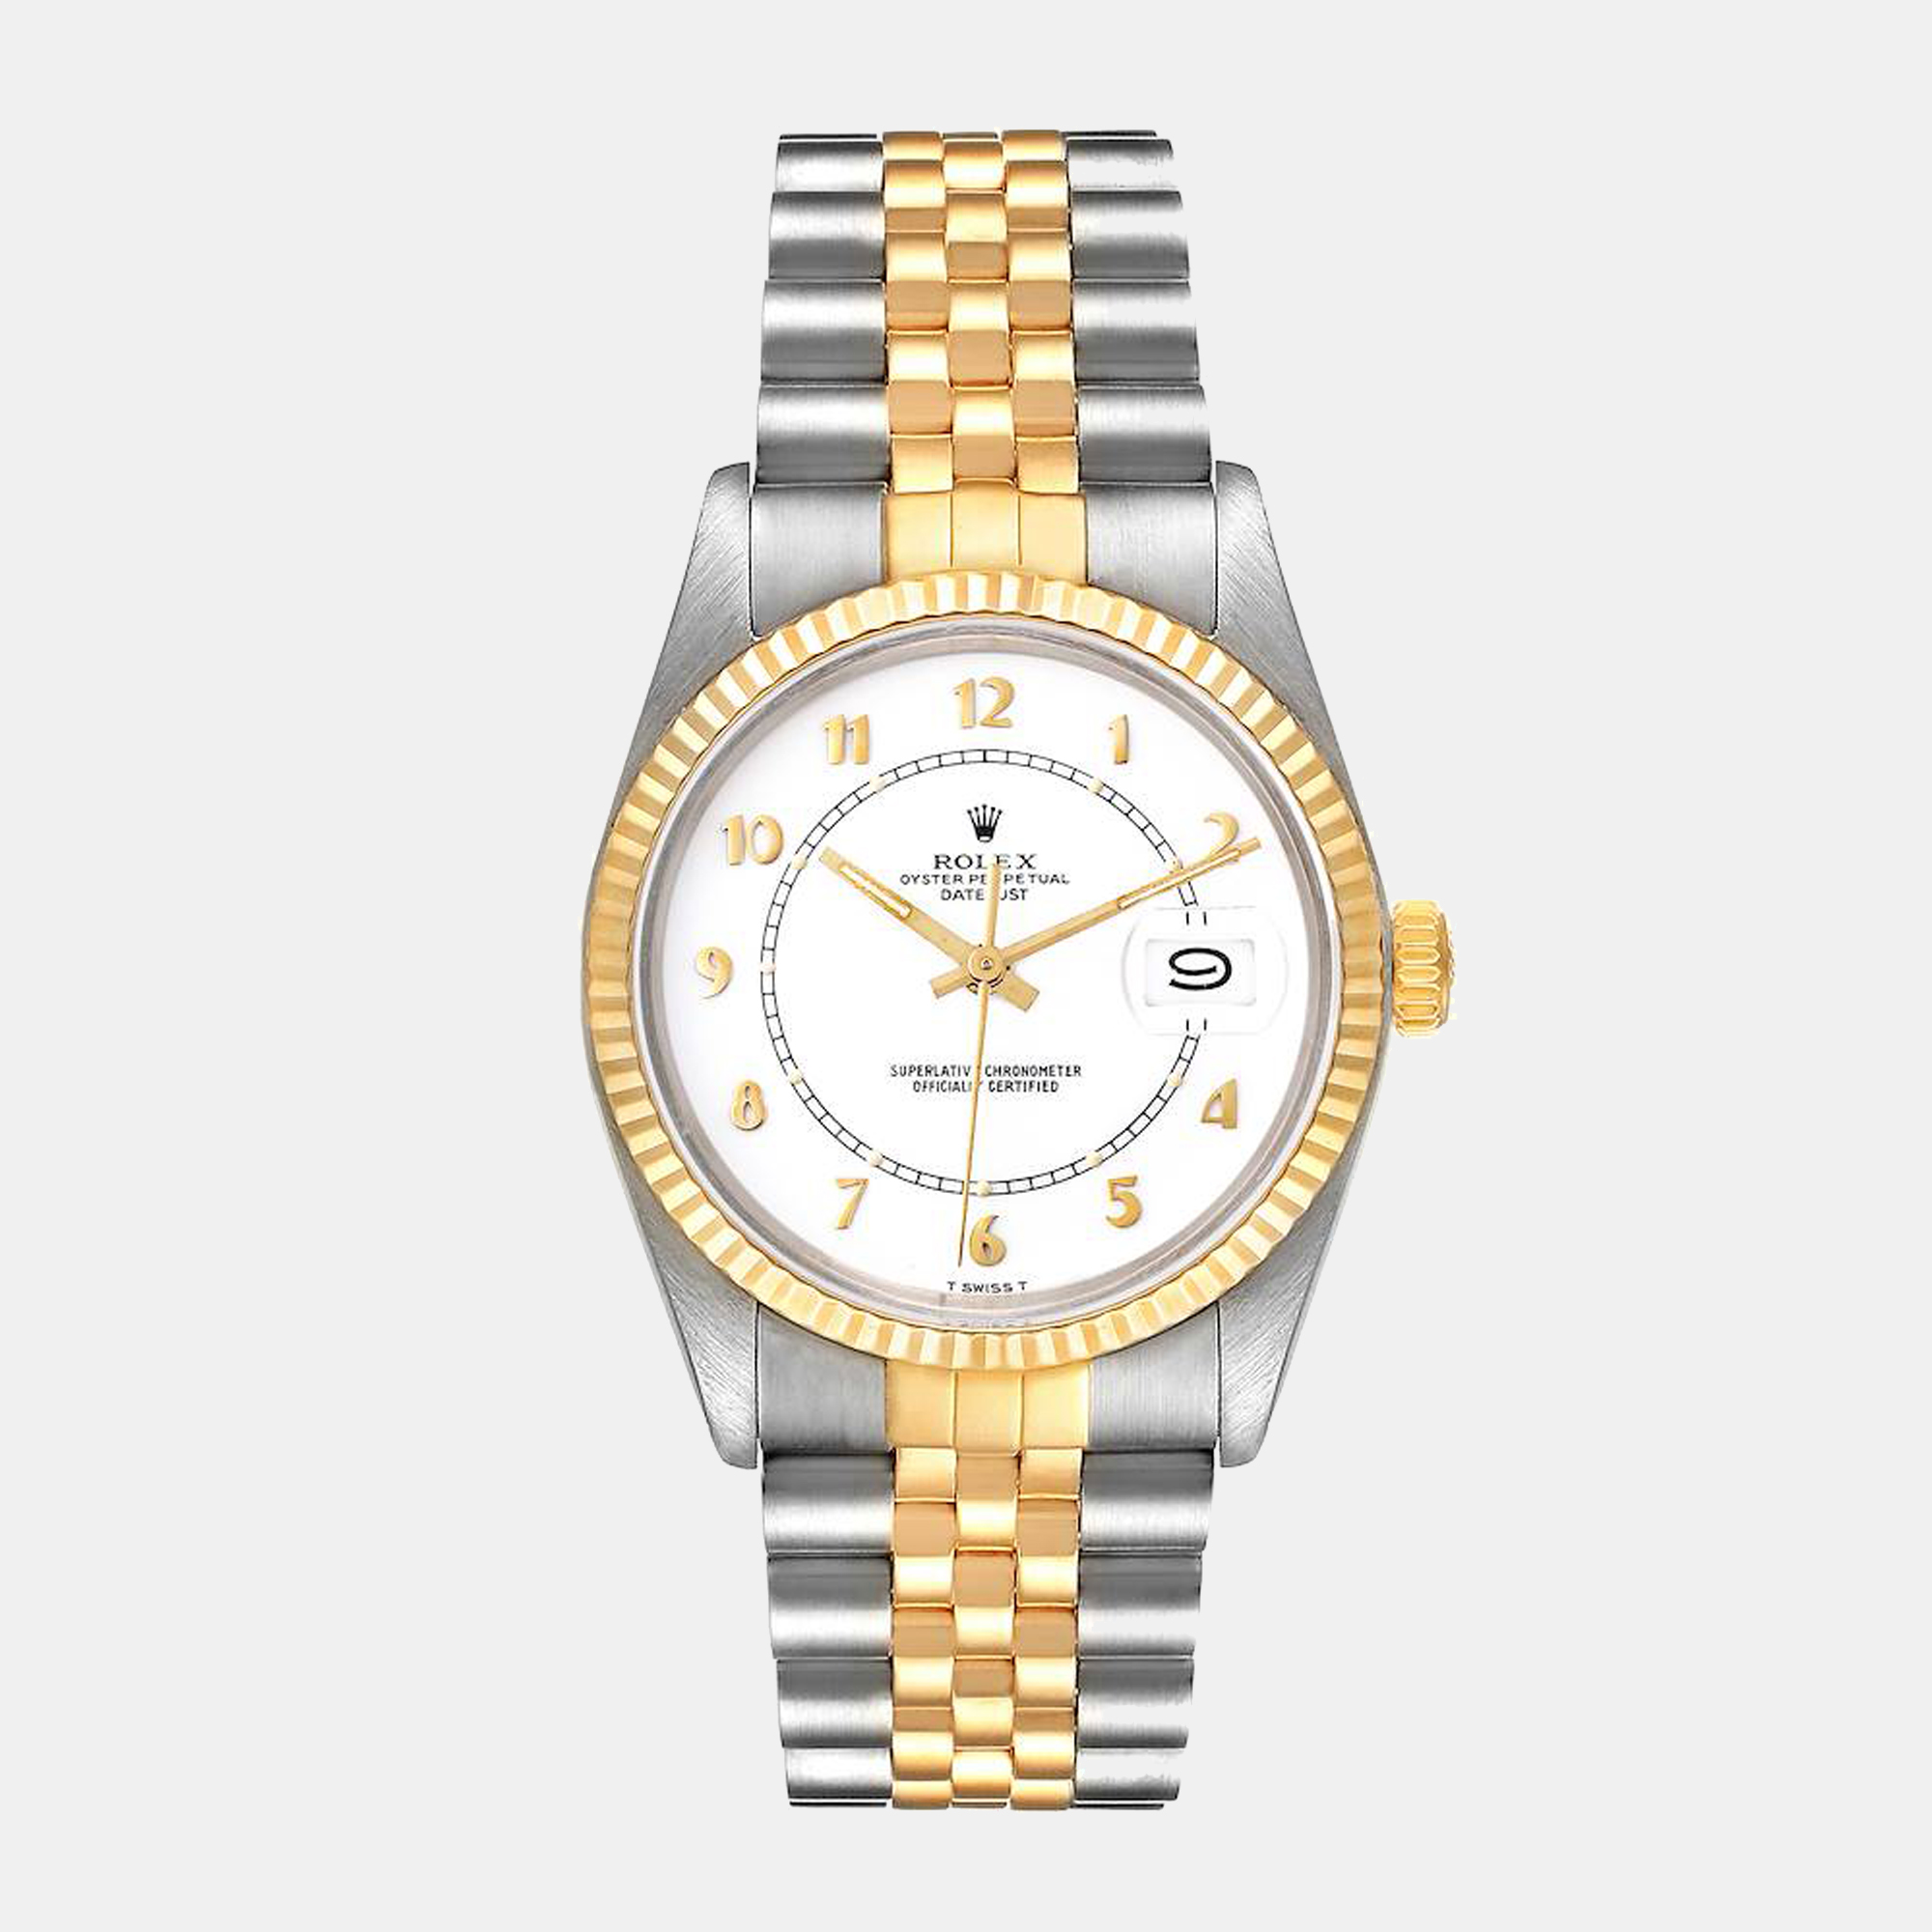 Pre-owned Rolex White 18k Yellow Gold And Stainless Steel Datejust 16013 Automatic Men's Wristwatch 36 Mm